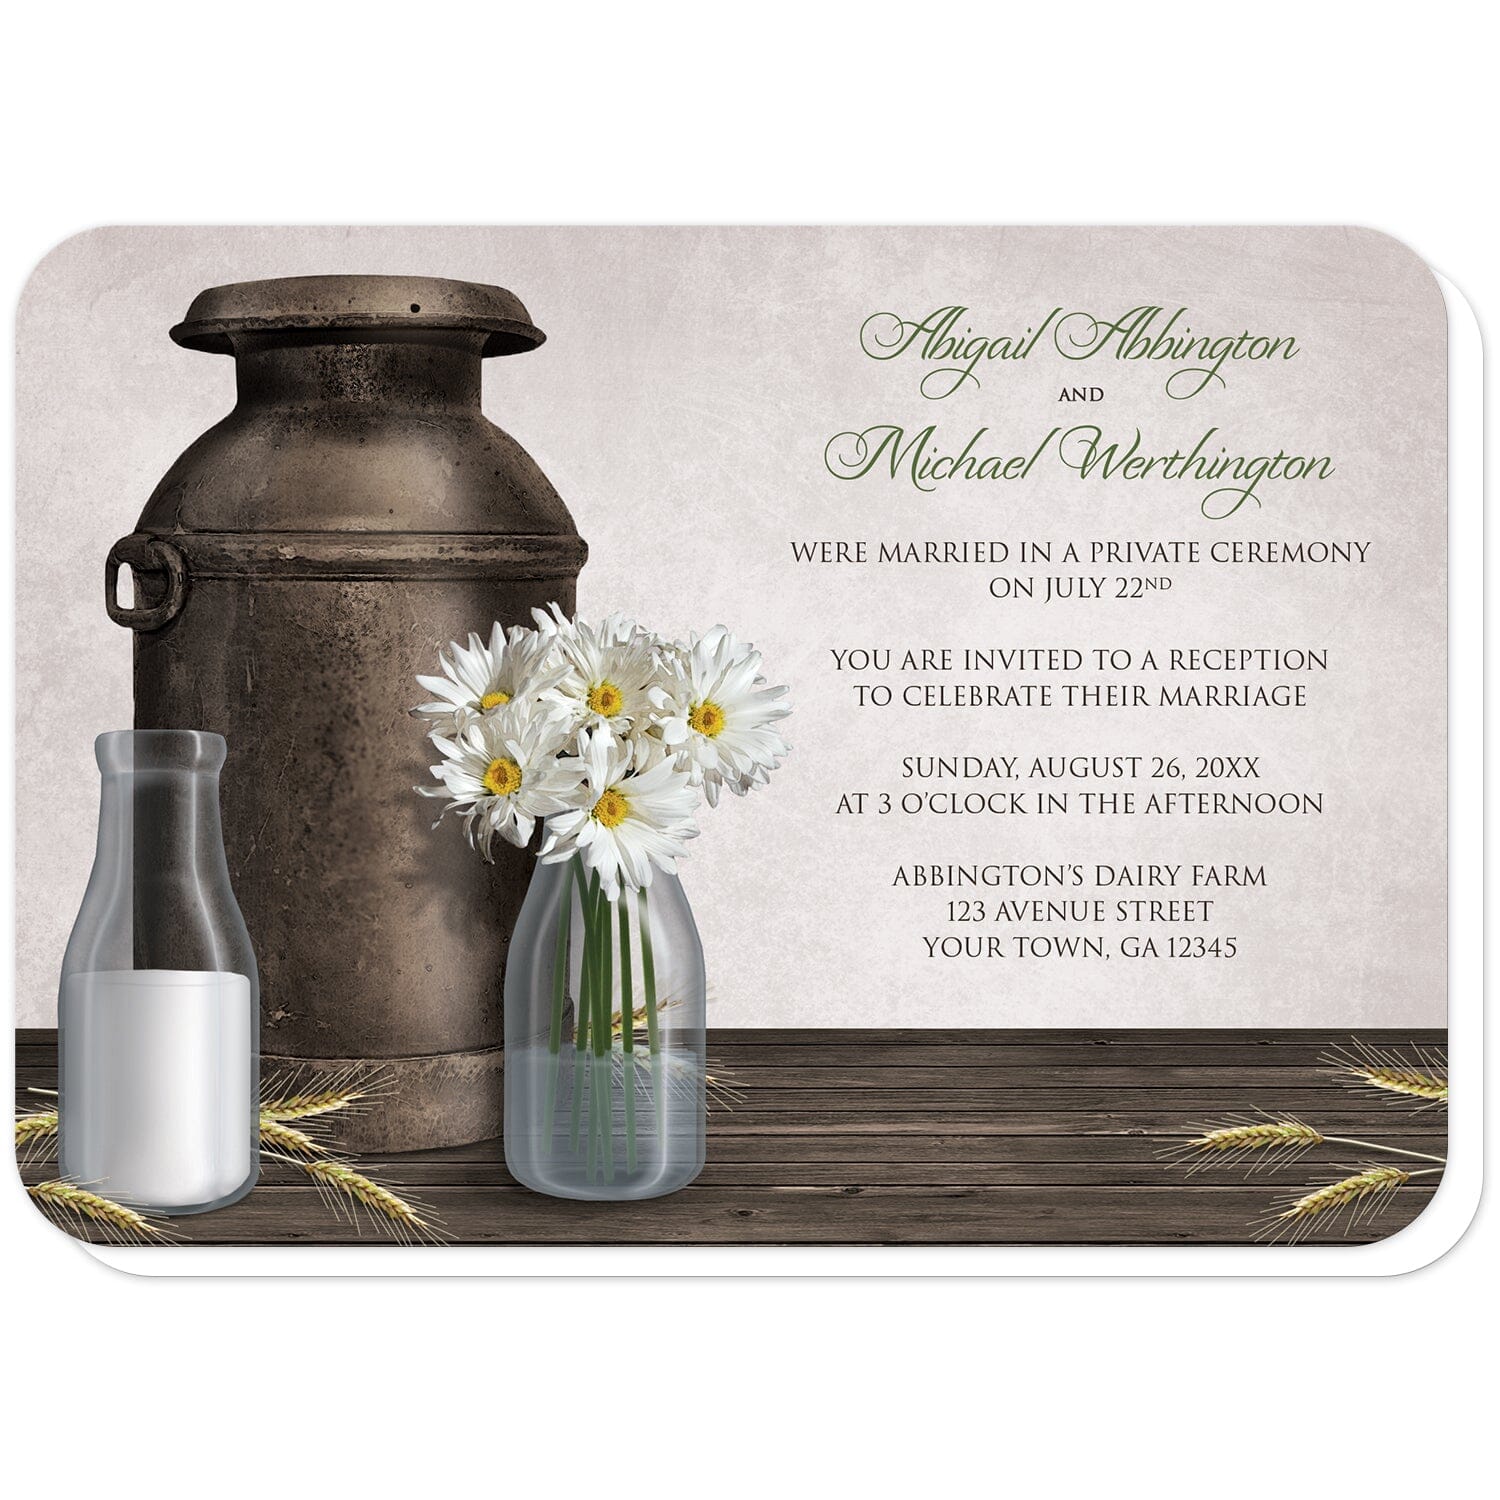 Rustic Country Dairy Farm Reception Only Invitations (with rounded corners) at Artistically Invited. Rustic country dairy farm reception only invitations with an illustration of an antique milk can, two milk bottles (one with milk, the other with white daisies and water) on a dark wood tabletop with hay stems. Your personalized post-wedding reception details are custom printed in brown and green over a light parchment-colored background.